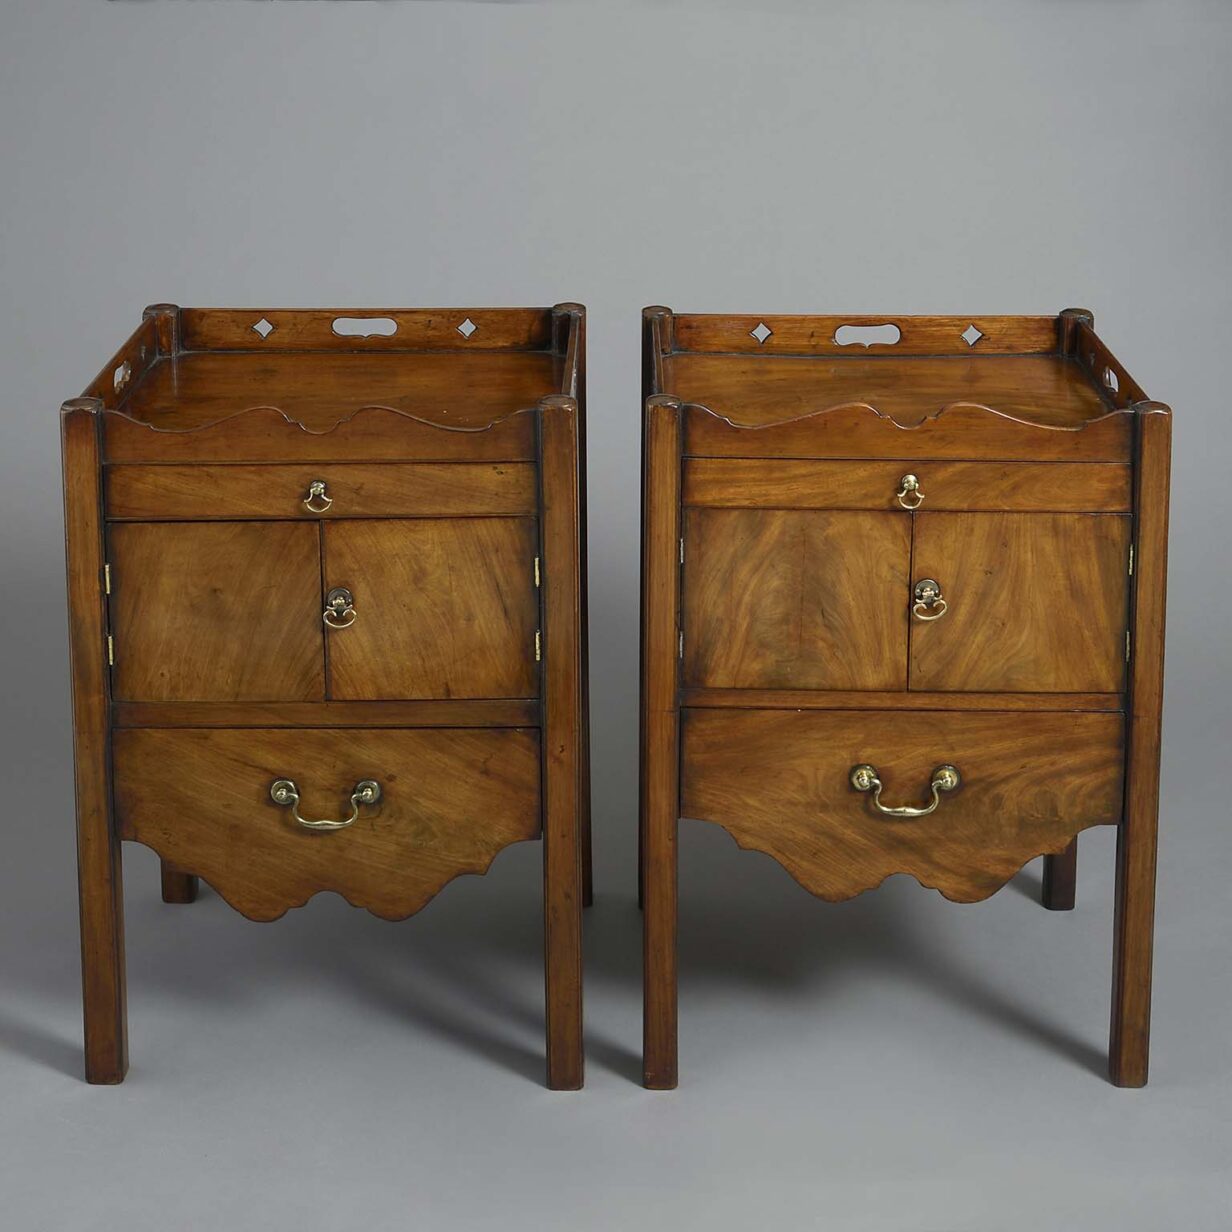 Pair of 18th century george iii period mahogany bedside tables